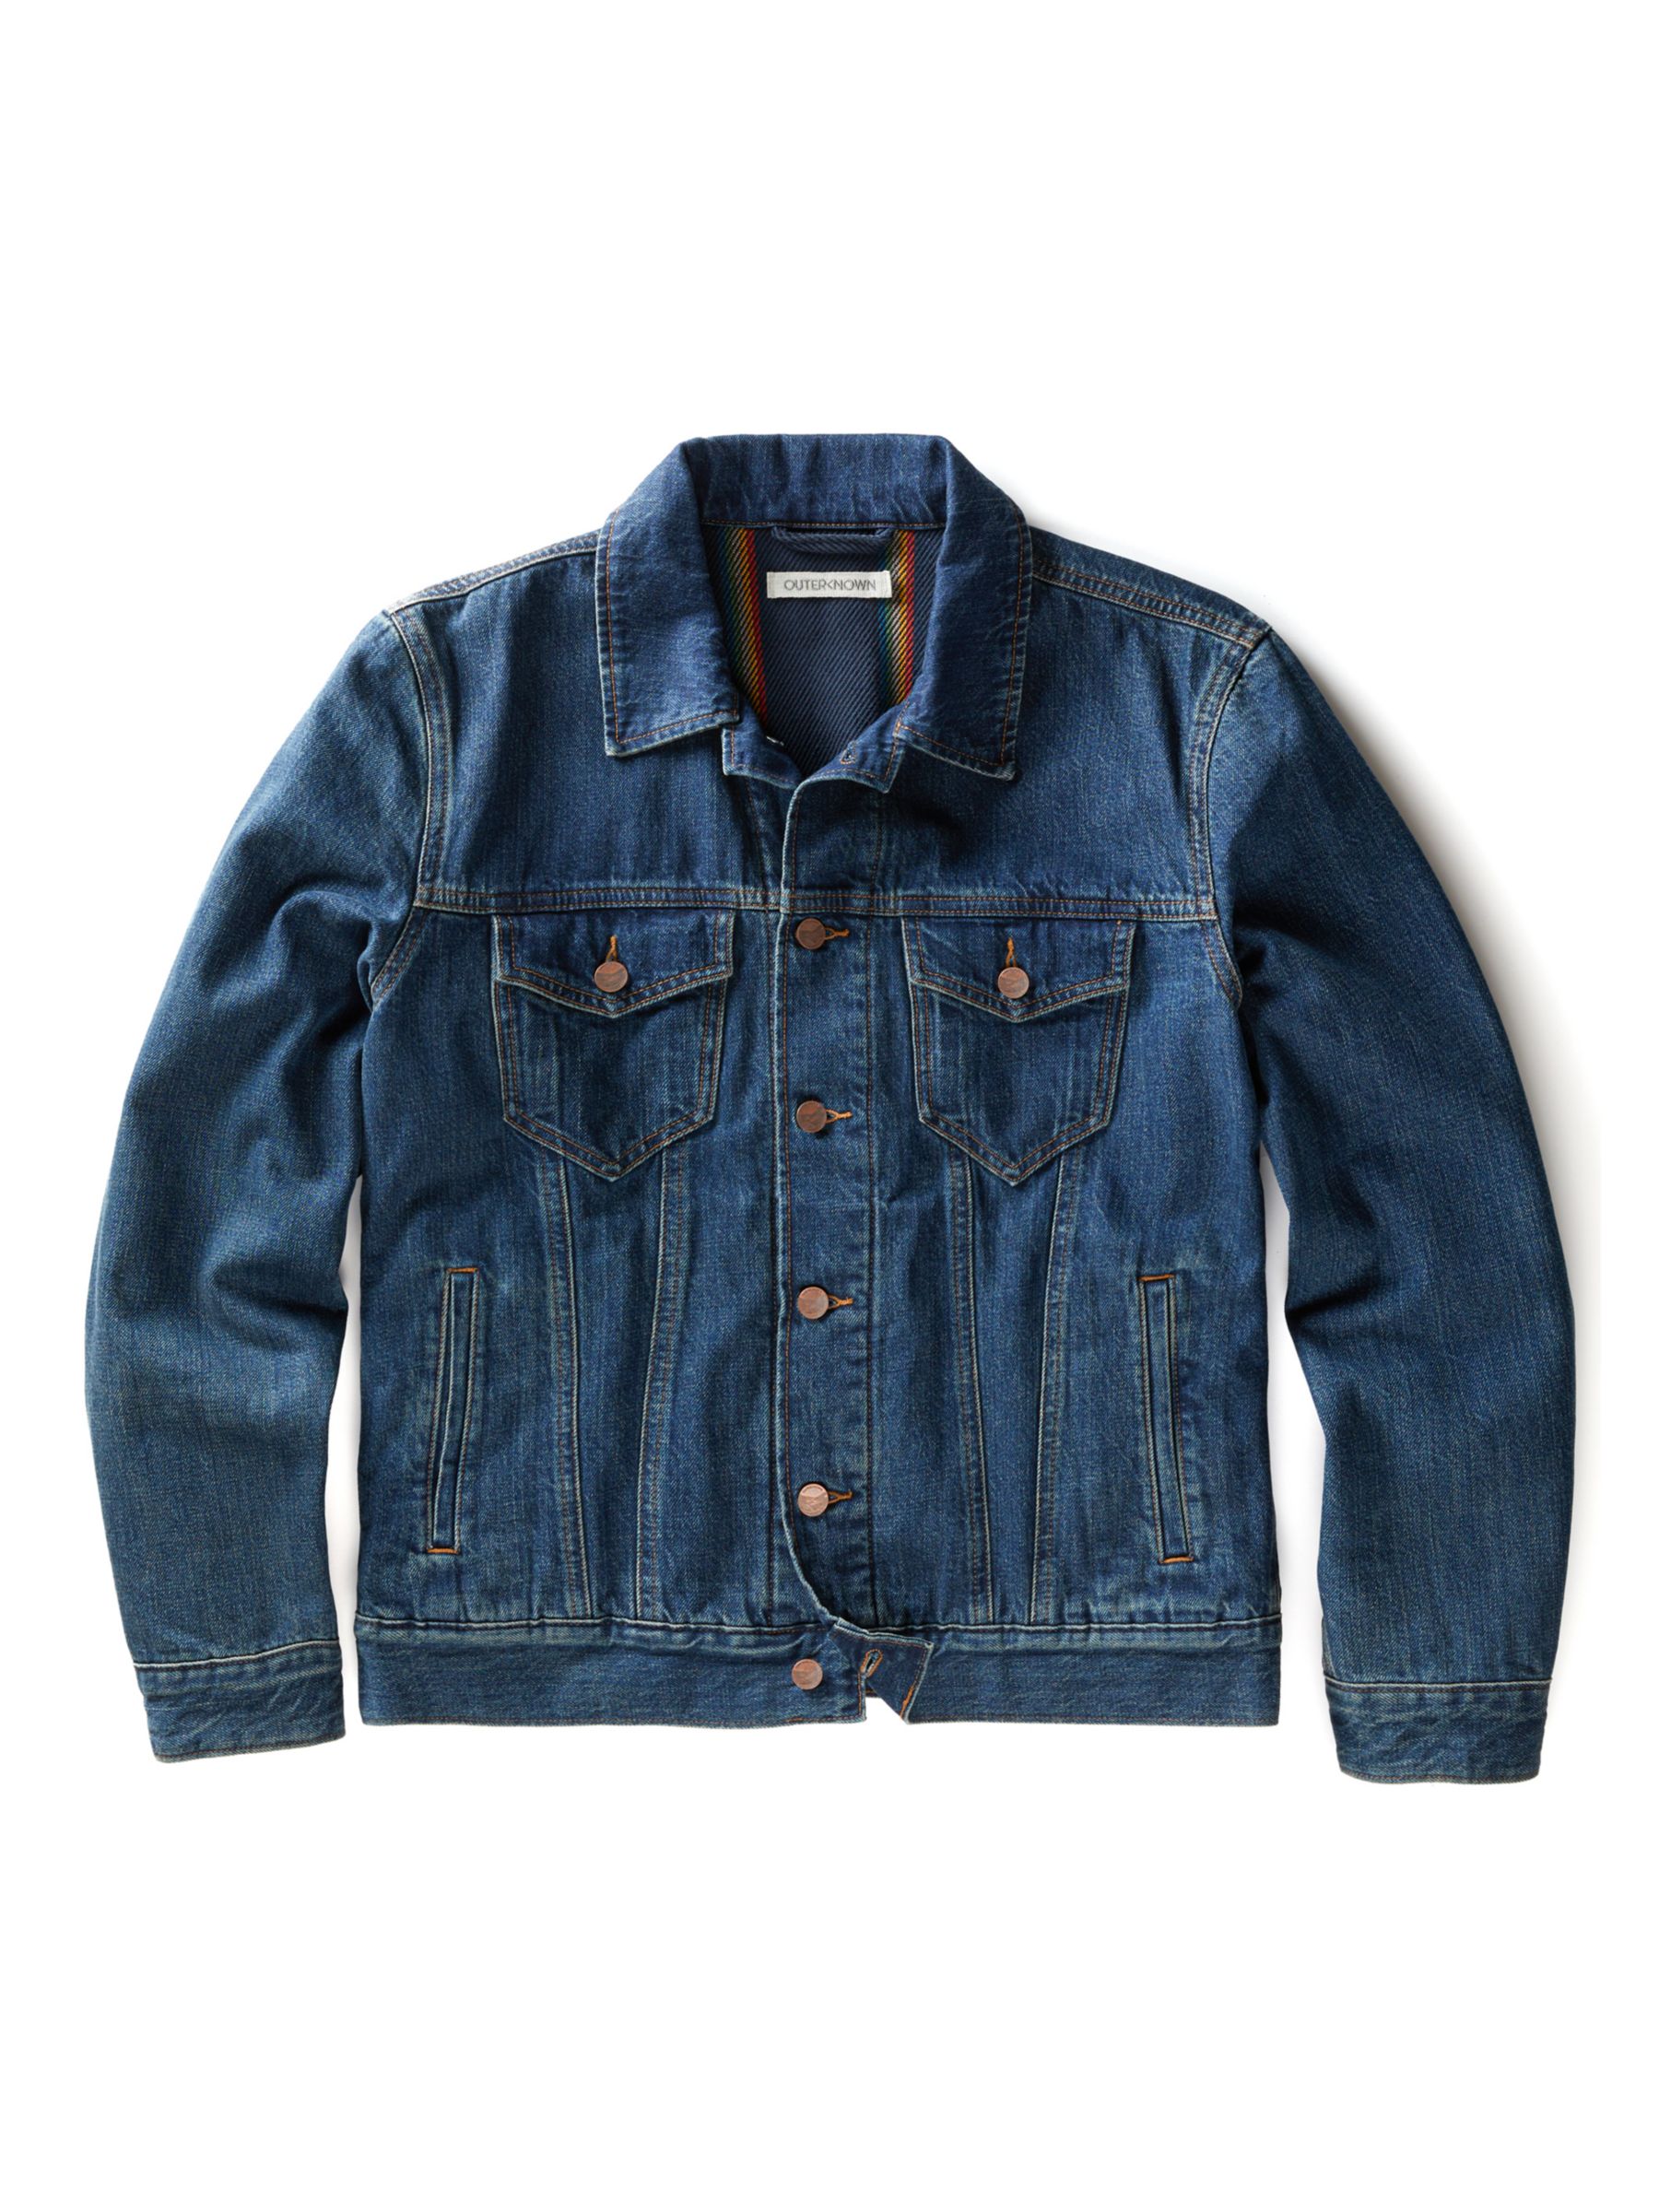 Outerknown Denim Lined Jacket, Tomales, L